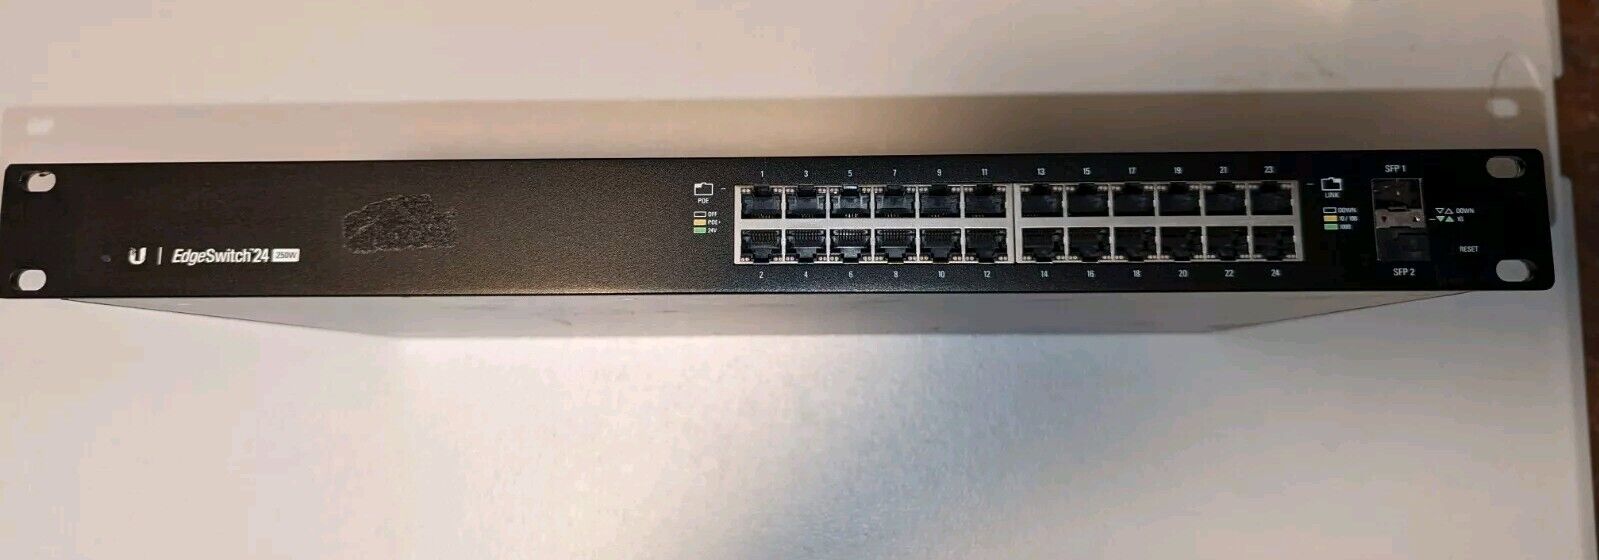 Ubiquiti Networks ES-24-250W 24 Port 250W EdgeSwitch *Pre-owned And Operational*